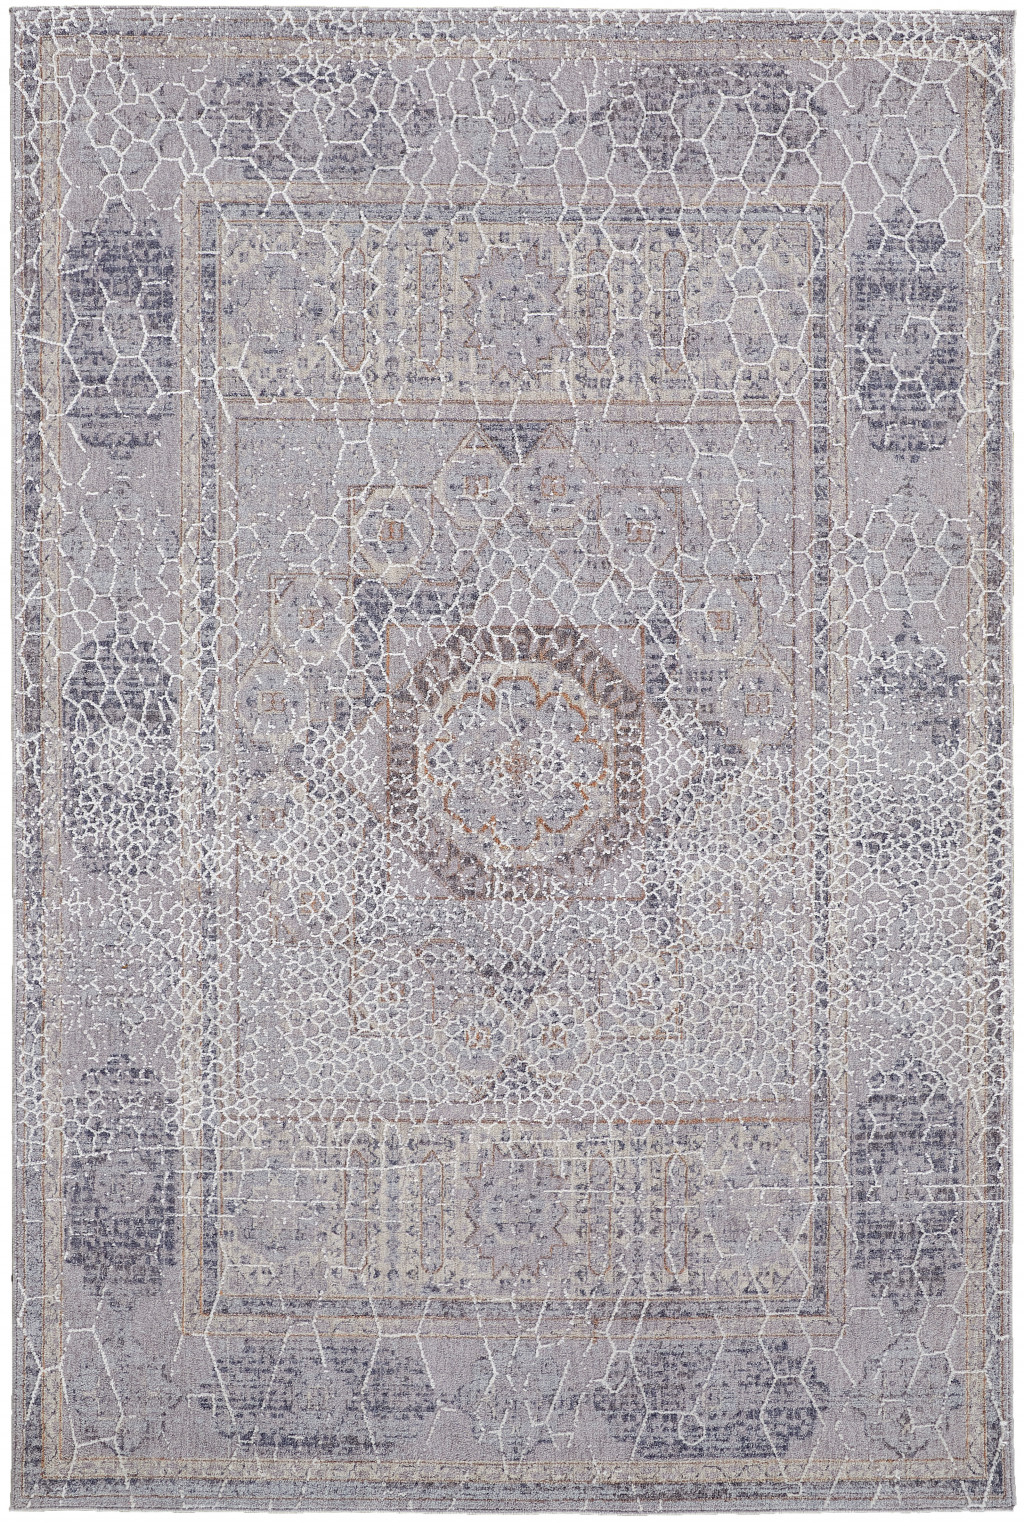 2' X 3' Gray And Ivory Floral Power Loom Distressed Stain Resistant Area Rug-513732-1